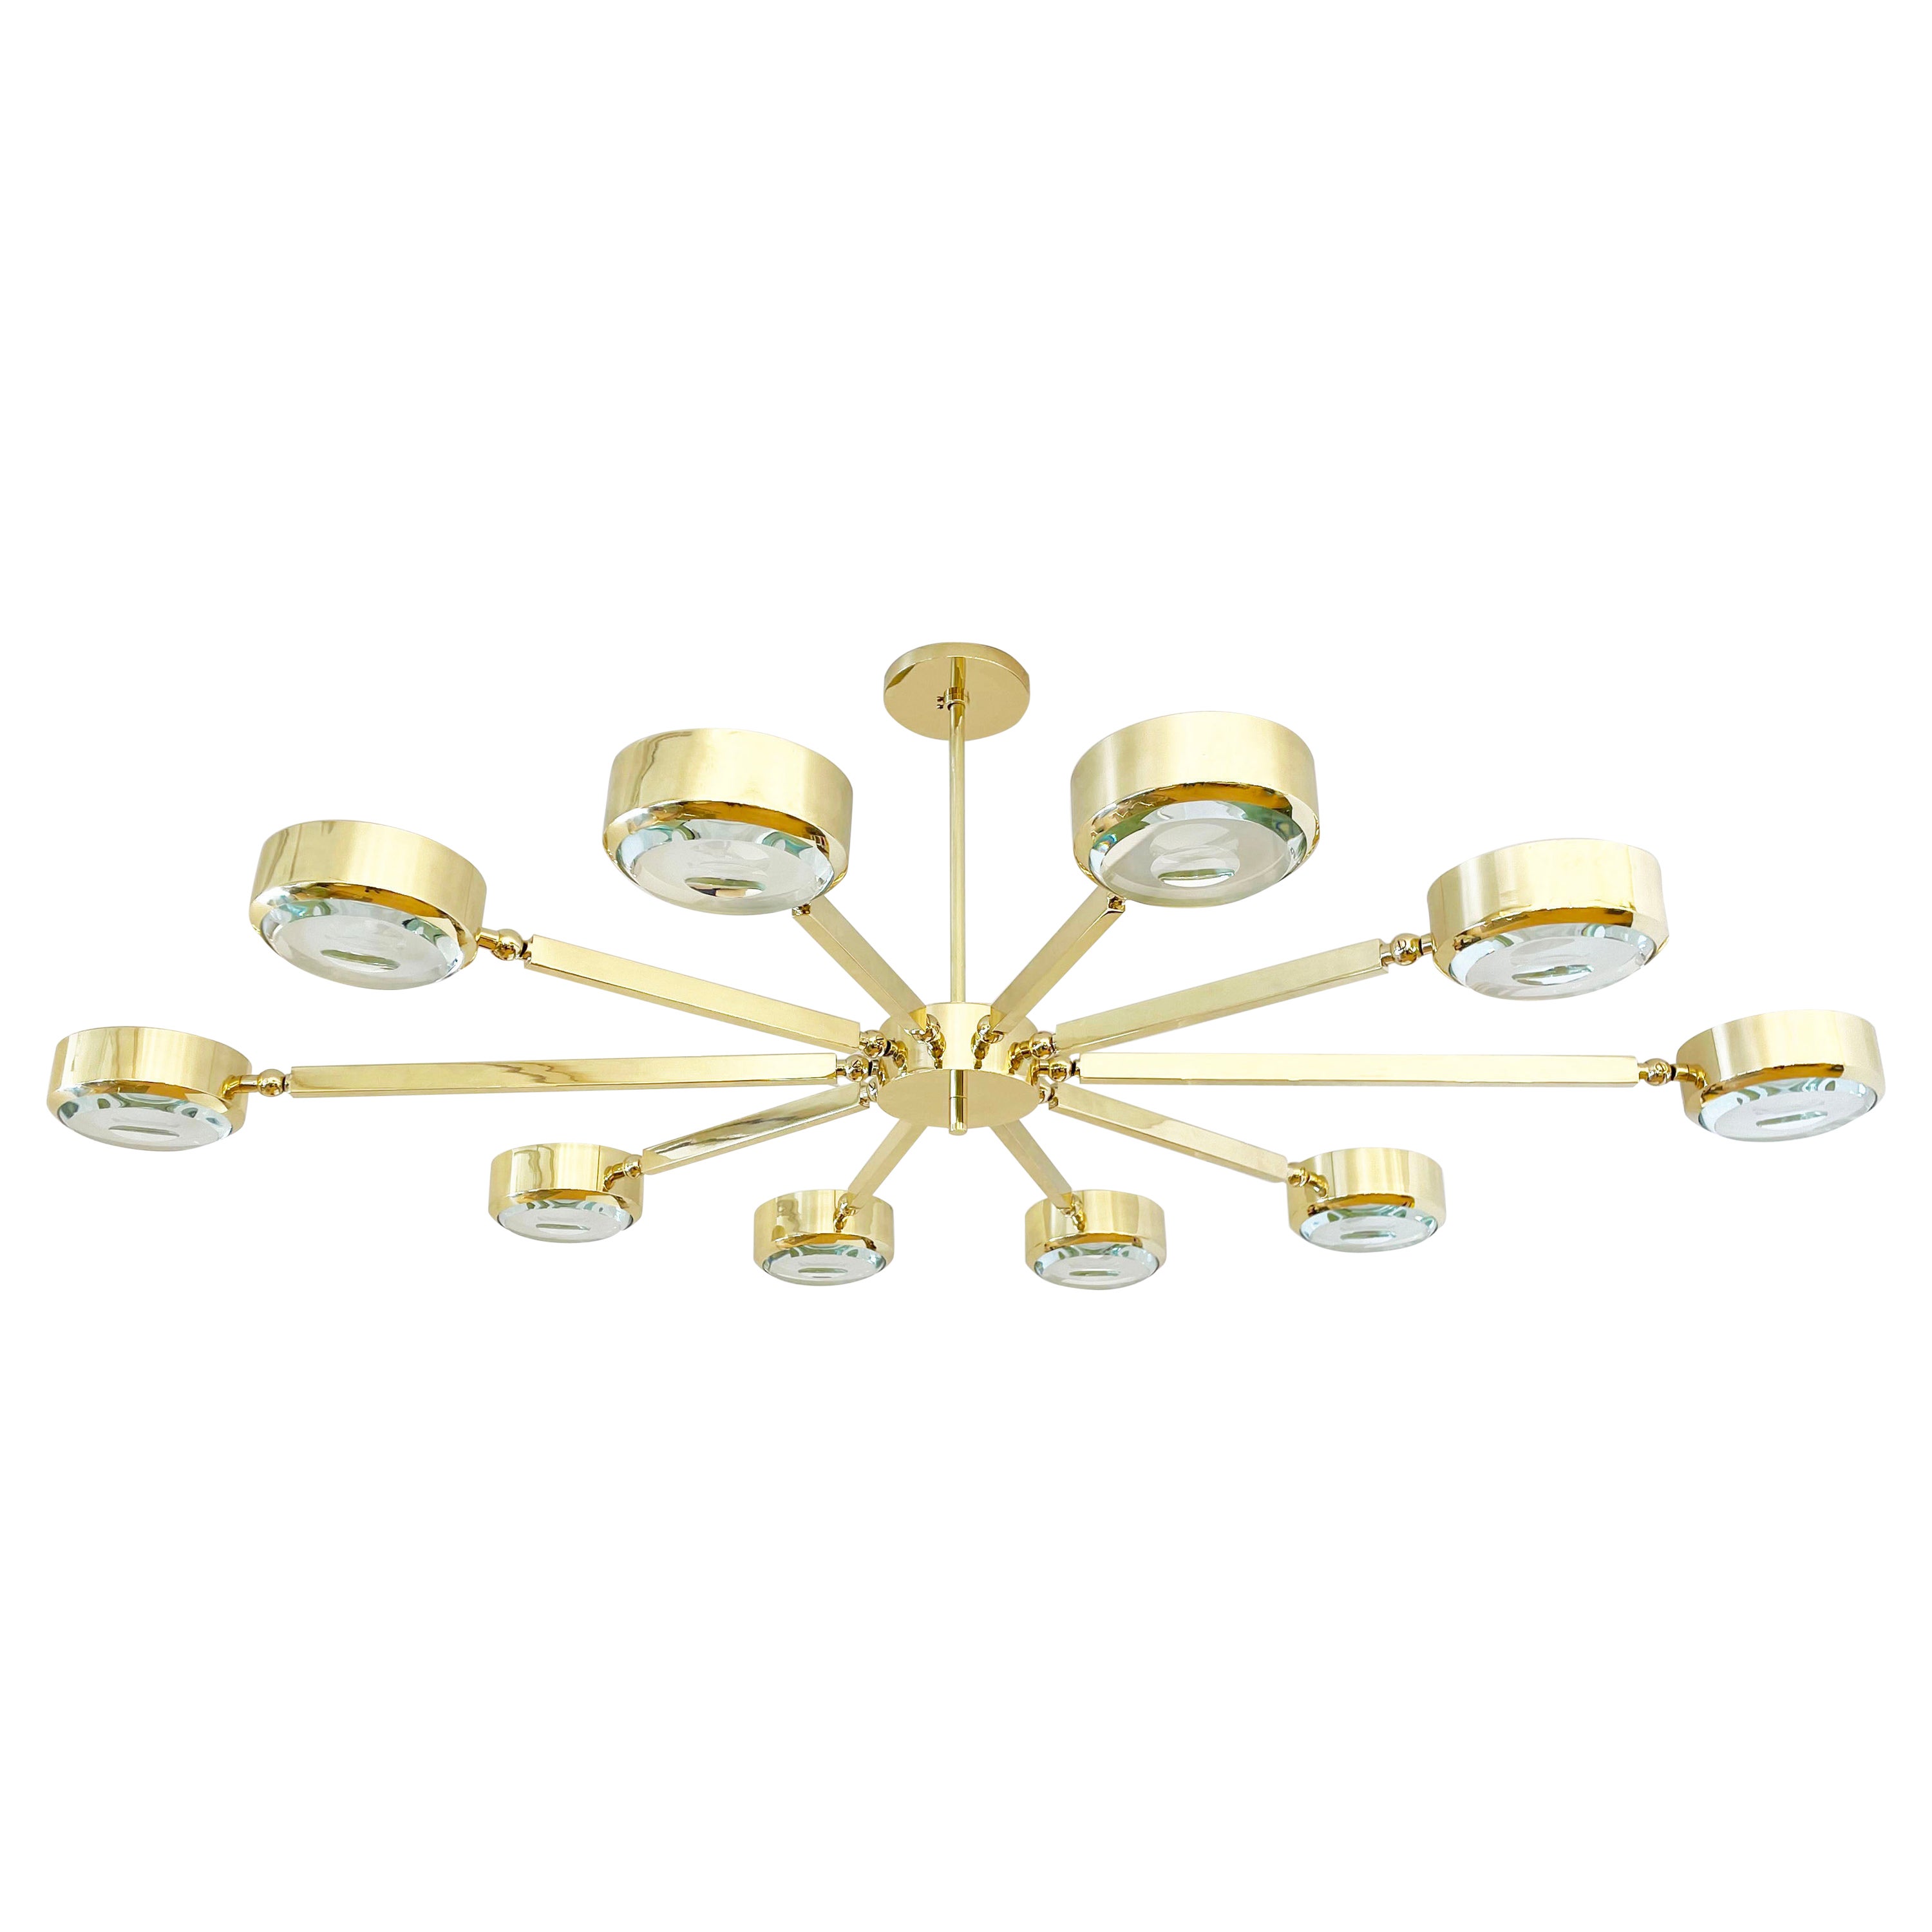 Italian Oculus Oval Ceiling Light by Gaspare Asaro- Polished Nickel with Carved Glass For Sale